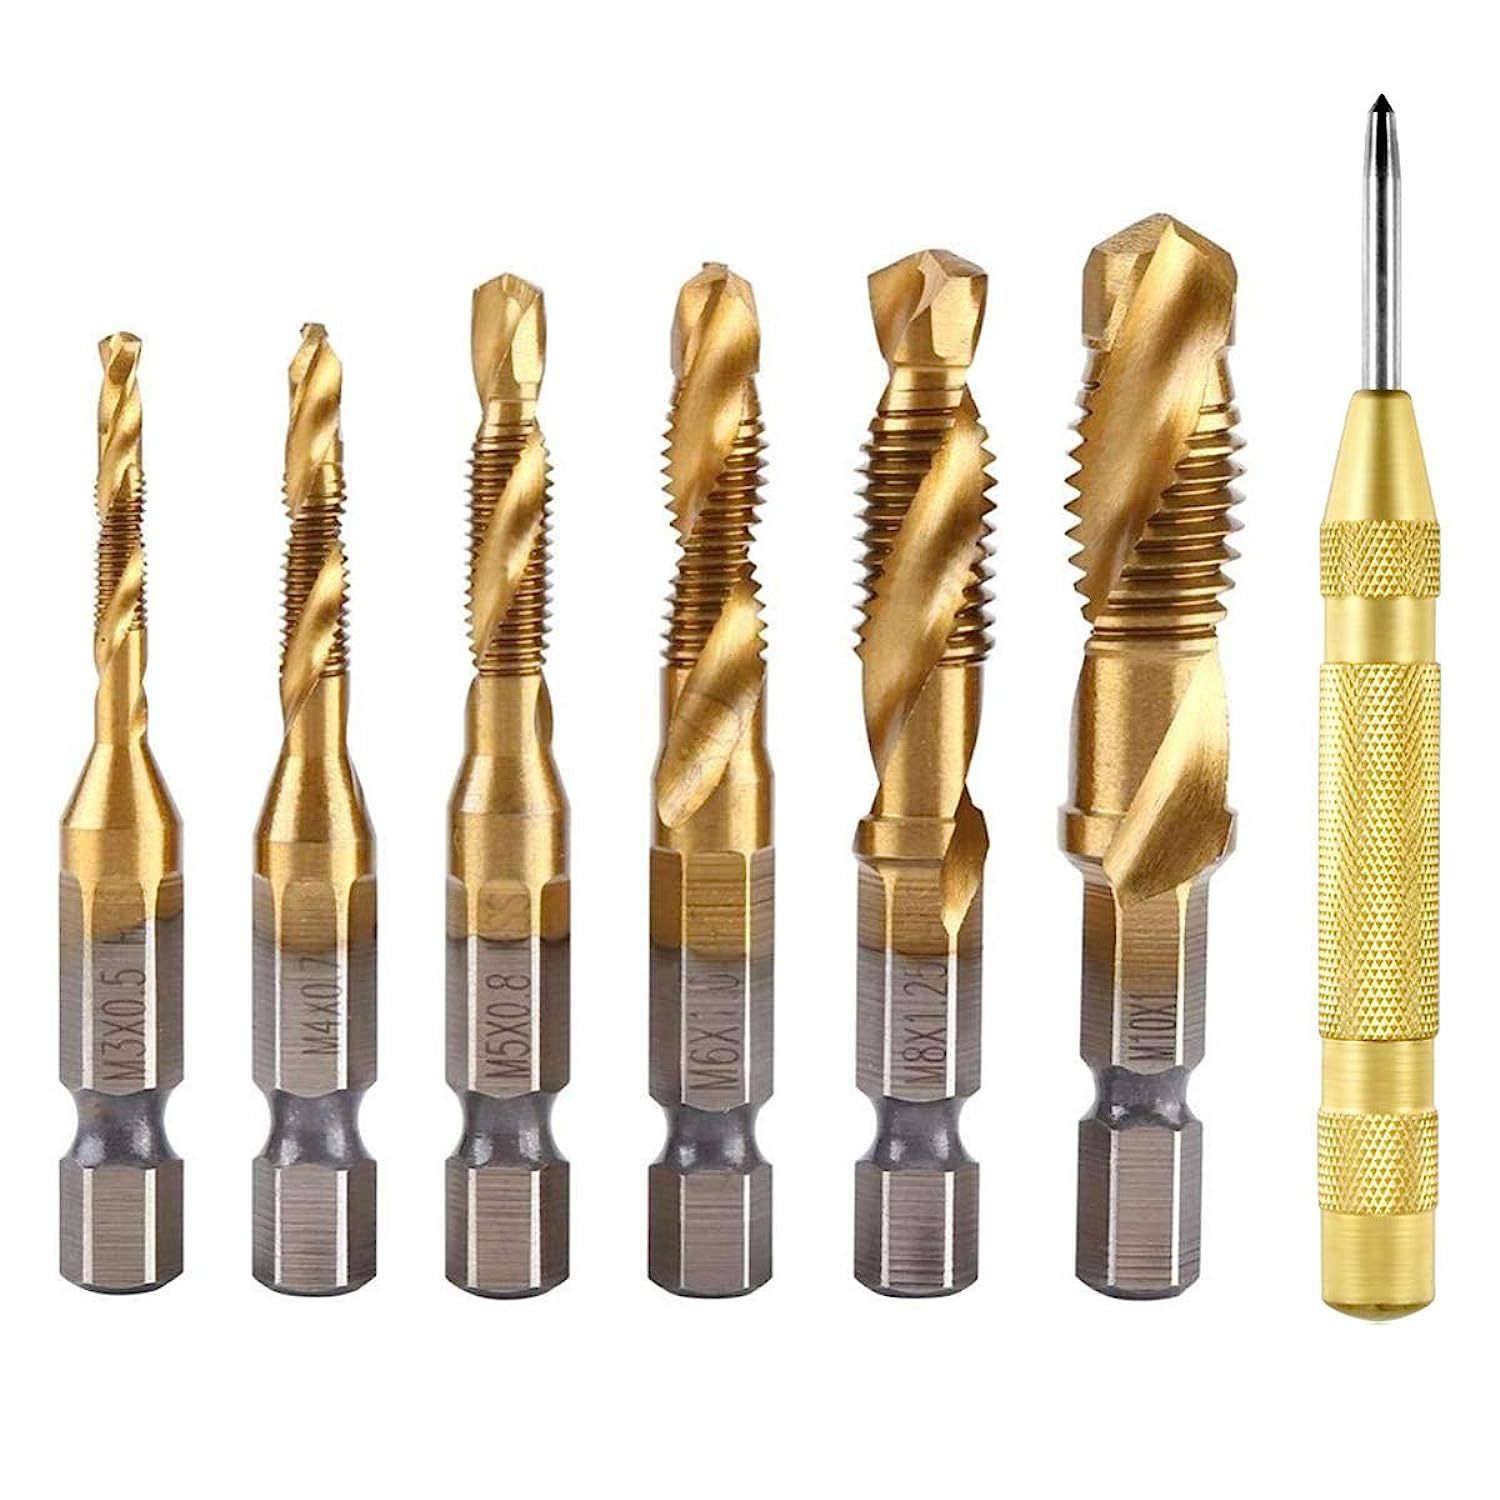 Primary image for 6Pcs Titanium Combination Drill And Tap Bits Set, 1/4" Hex Shank Hss Sae Screw T